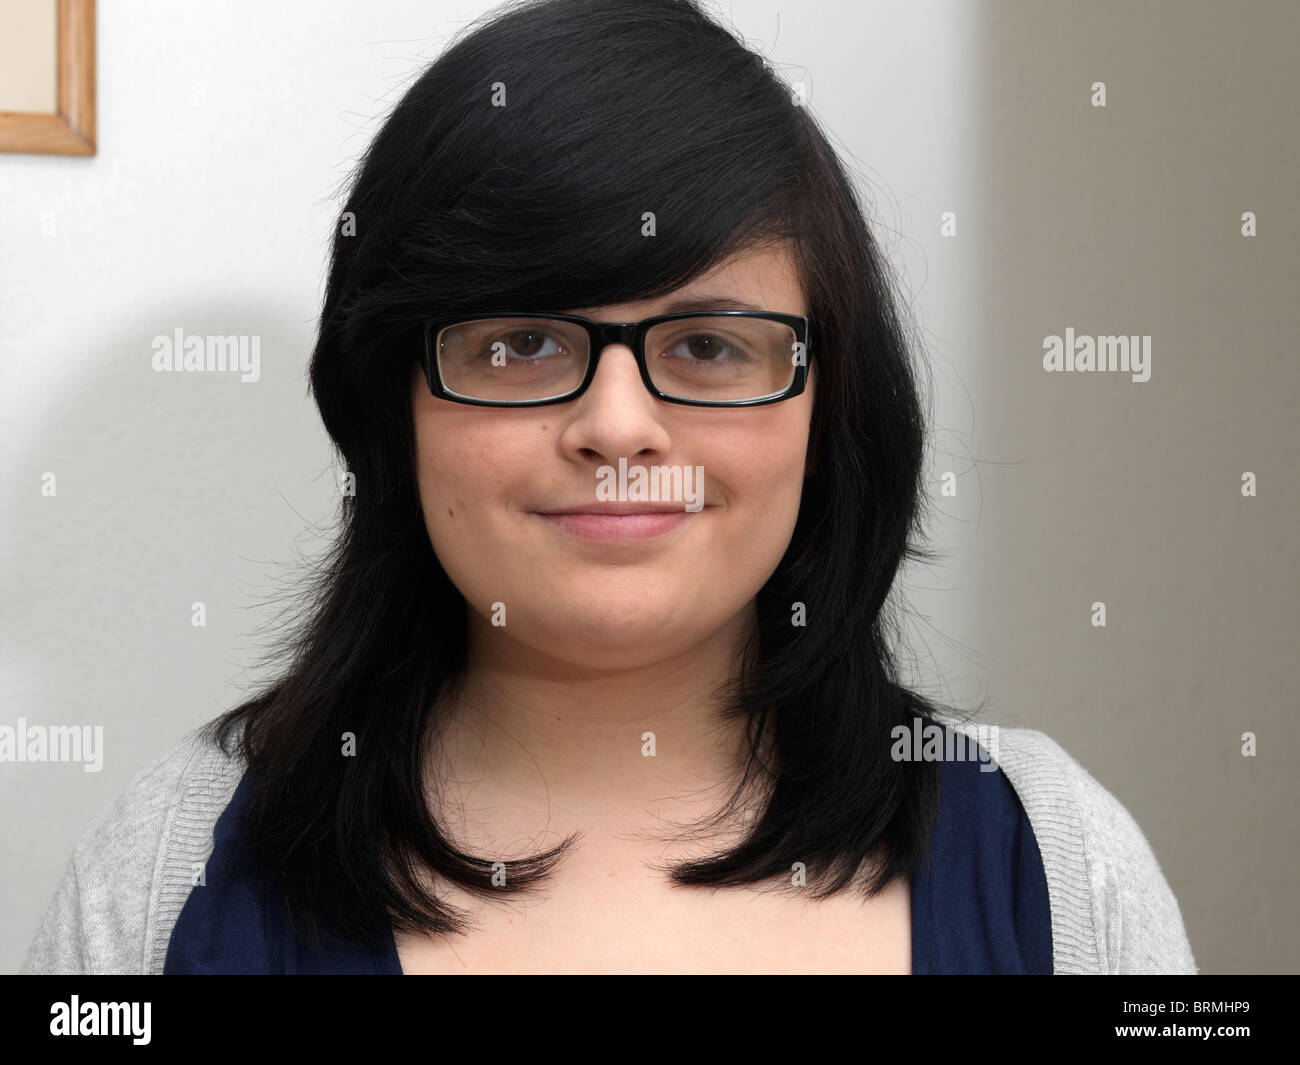 Portrait Of A 19 Year Old Girl Wearing Glasses Stock Photo